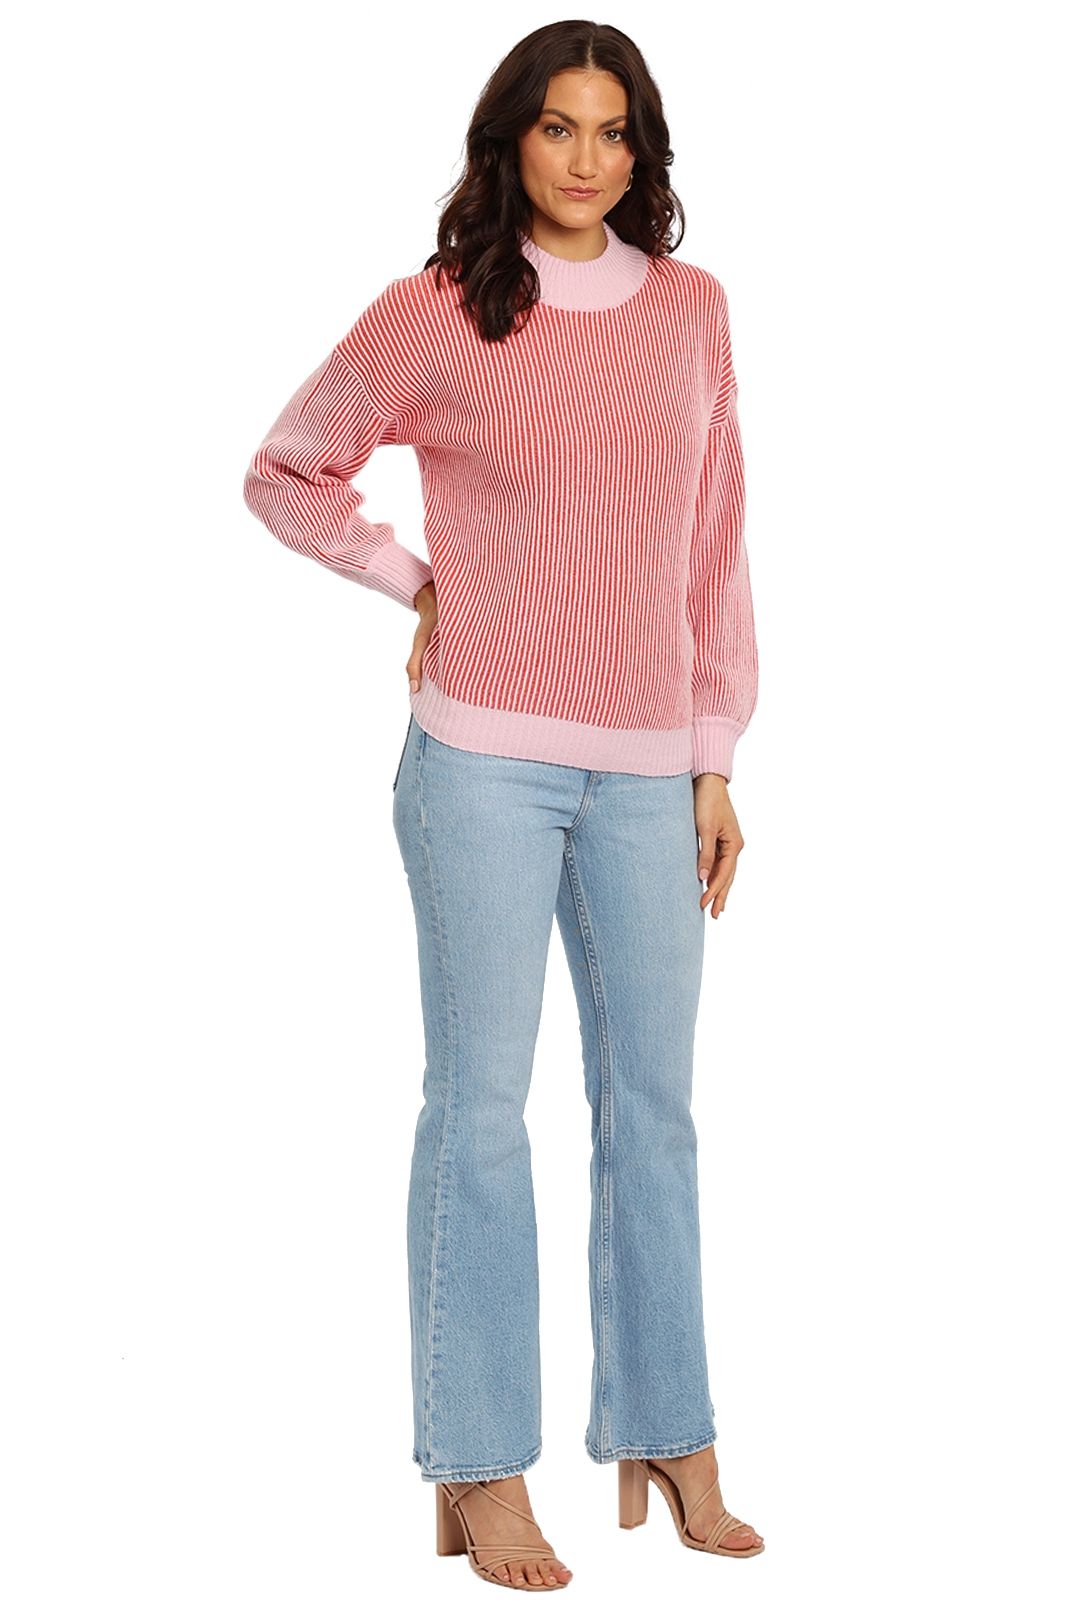 Bande Studio Isabelle Slouch Knit Pink Long Sleeves